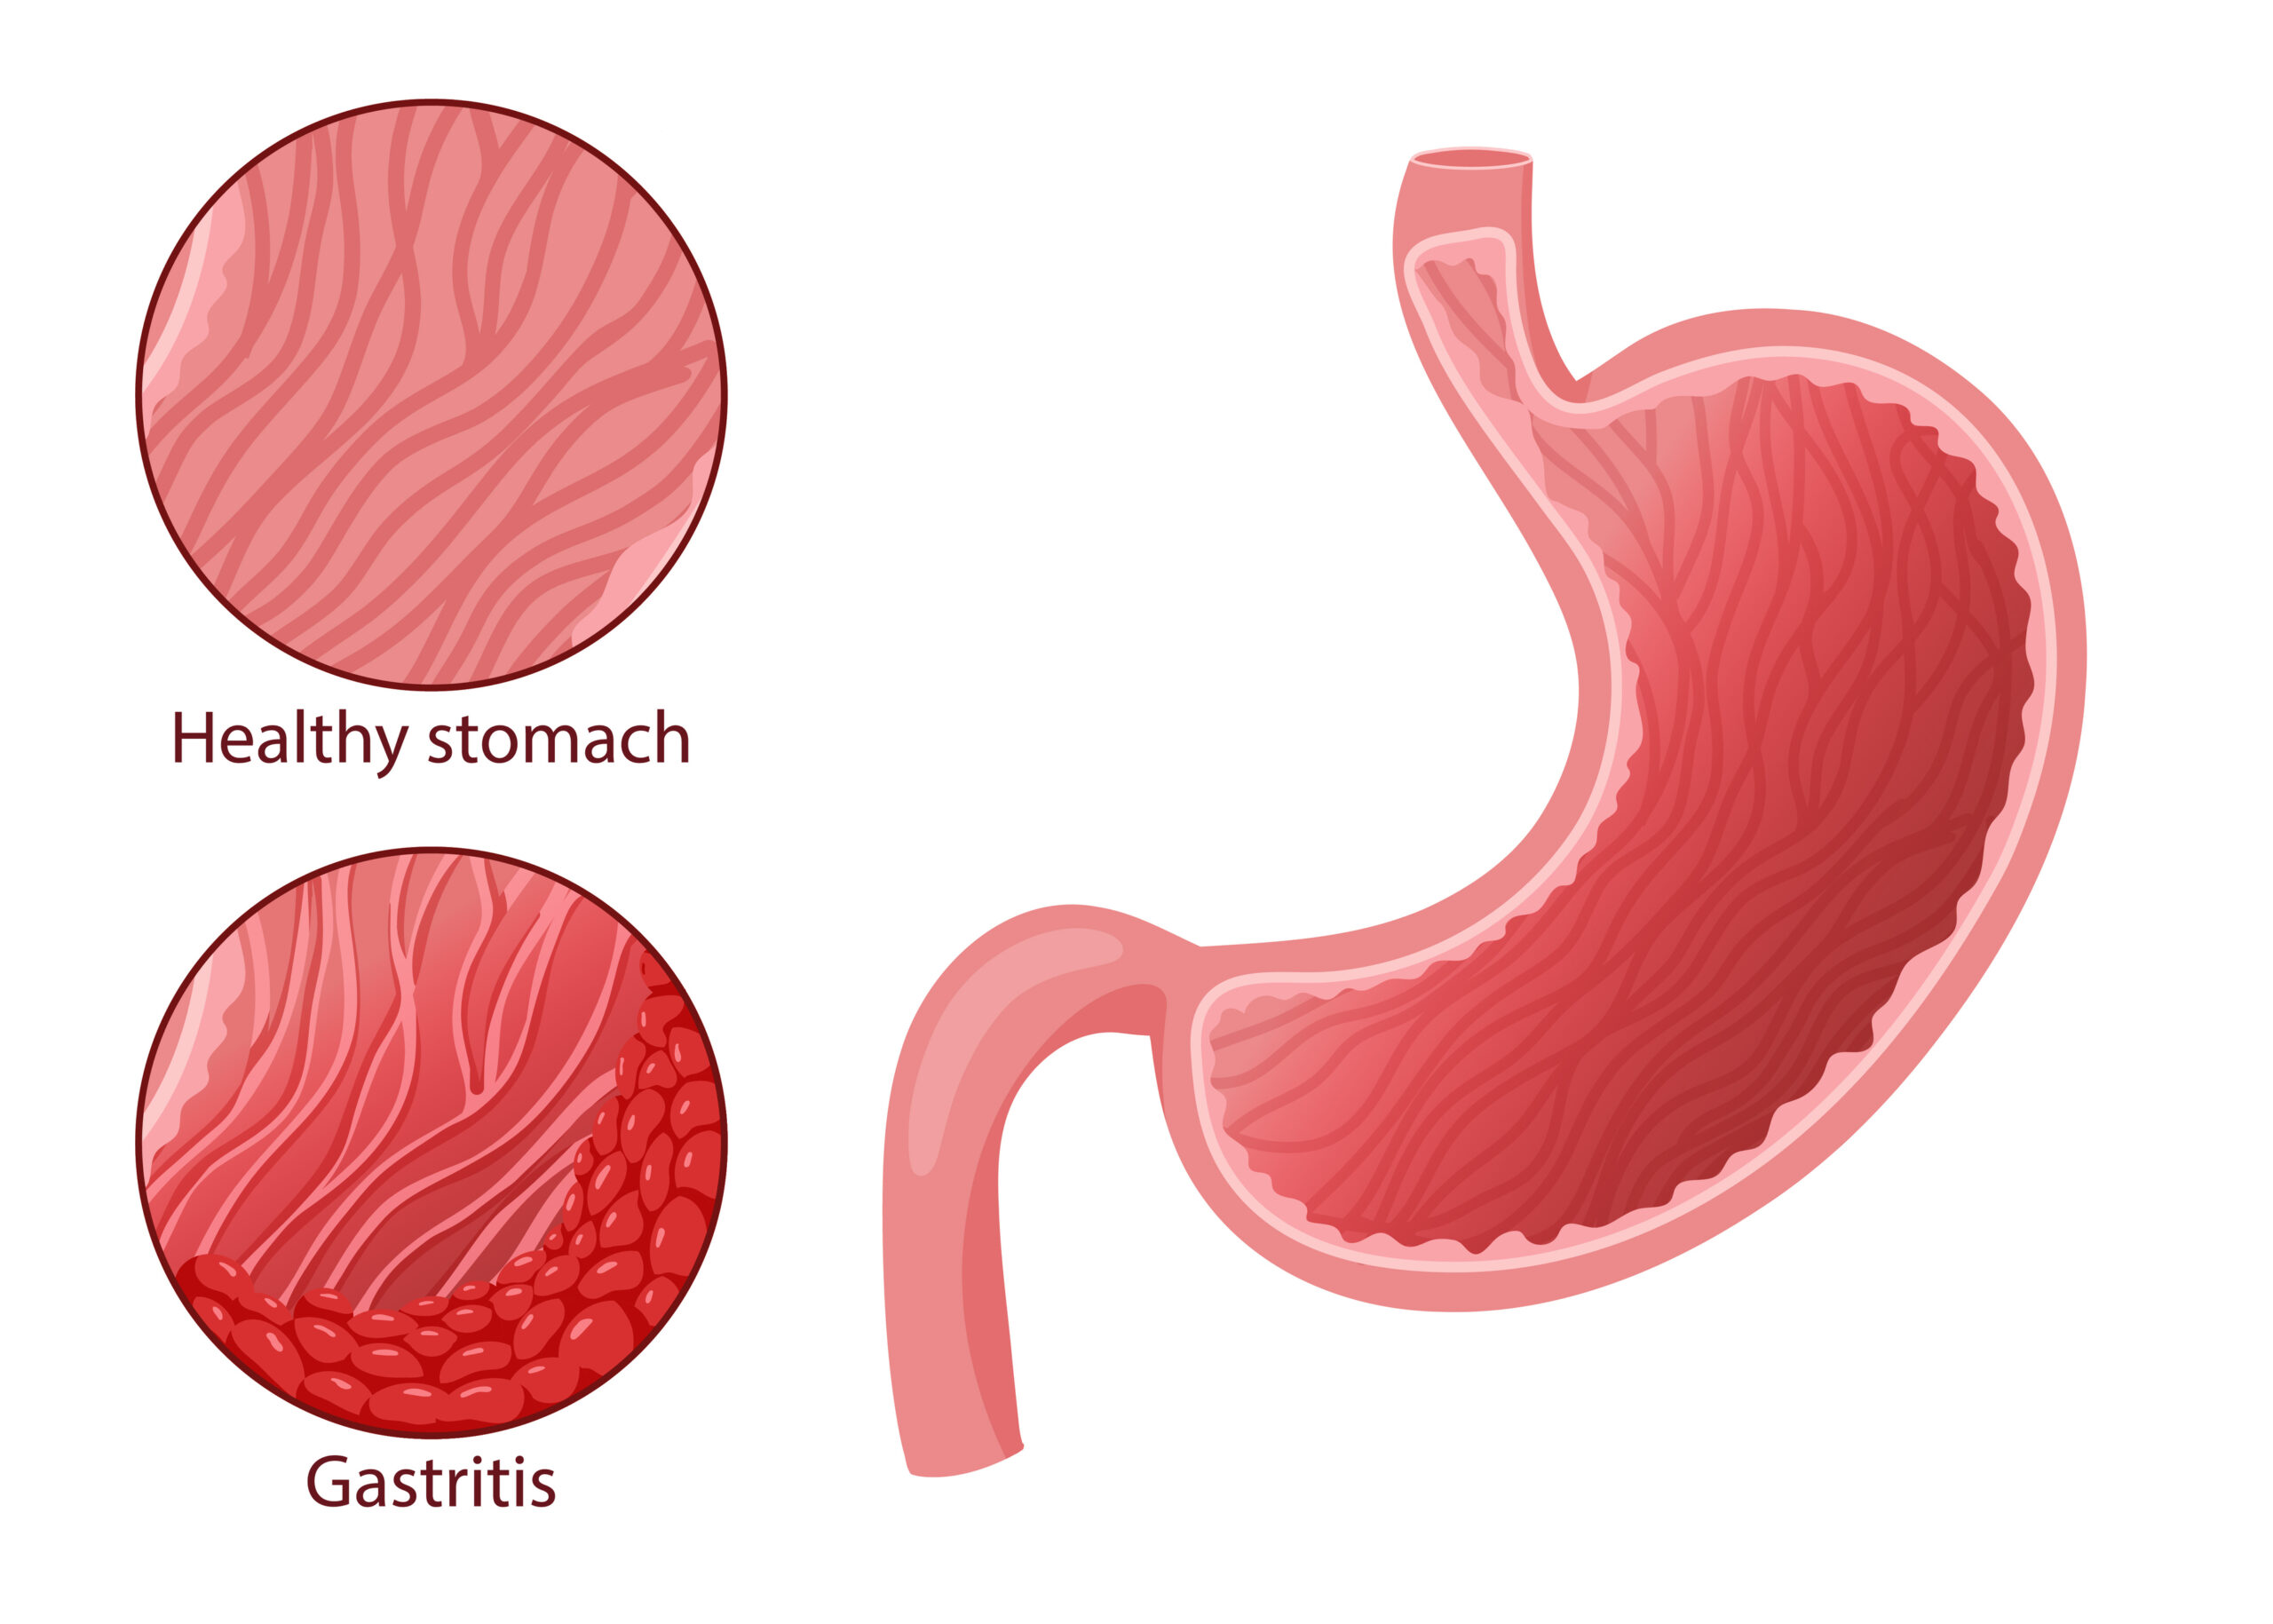 Healthy stomach and gastritis illustration